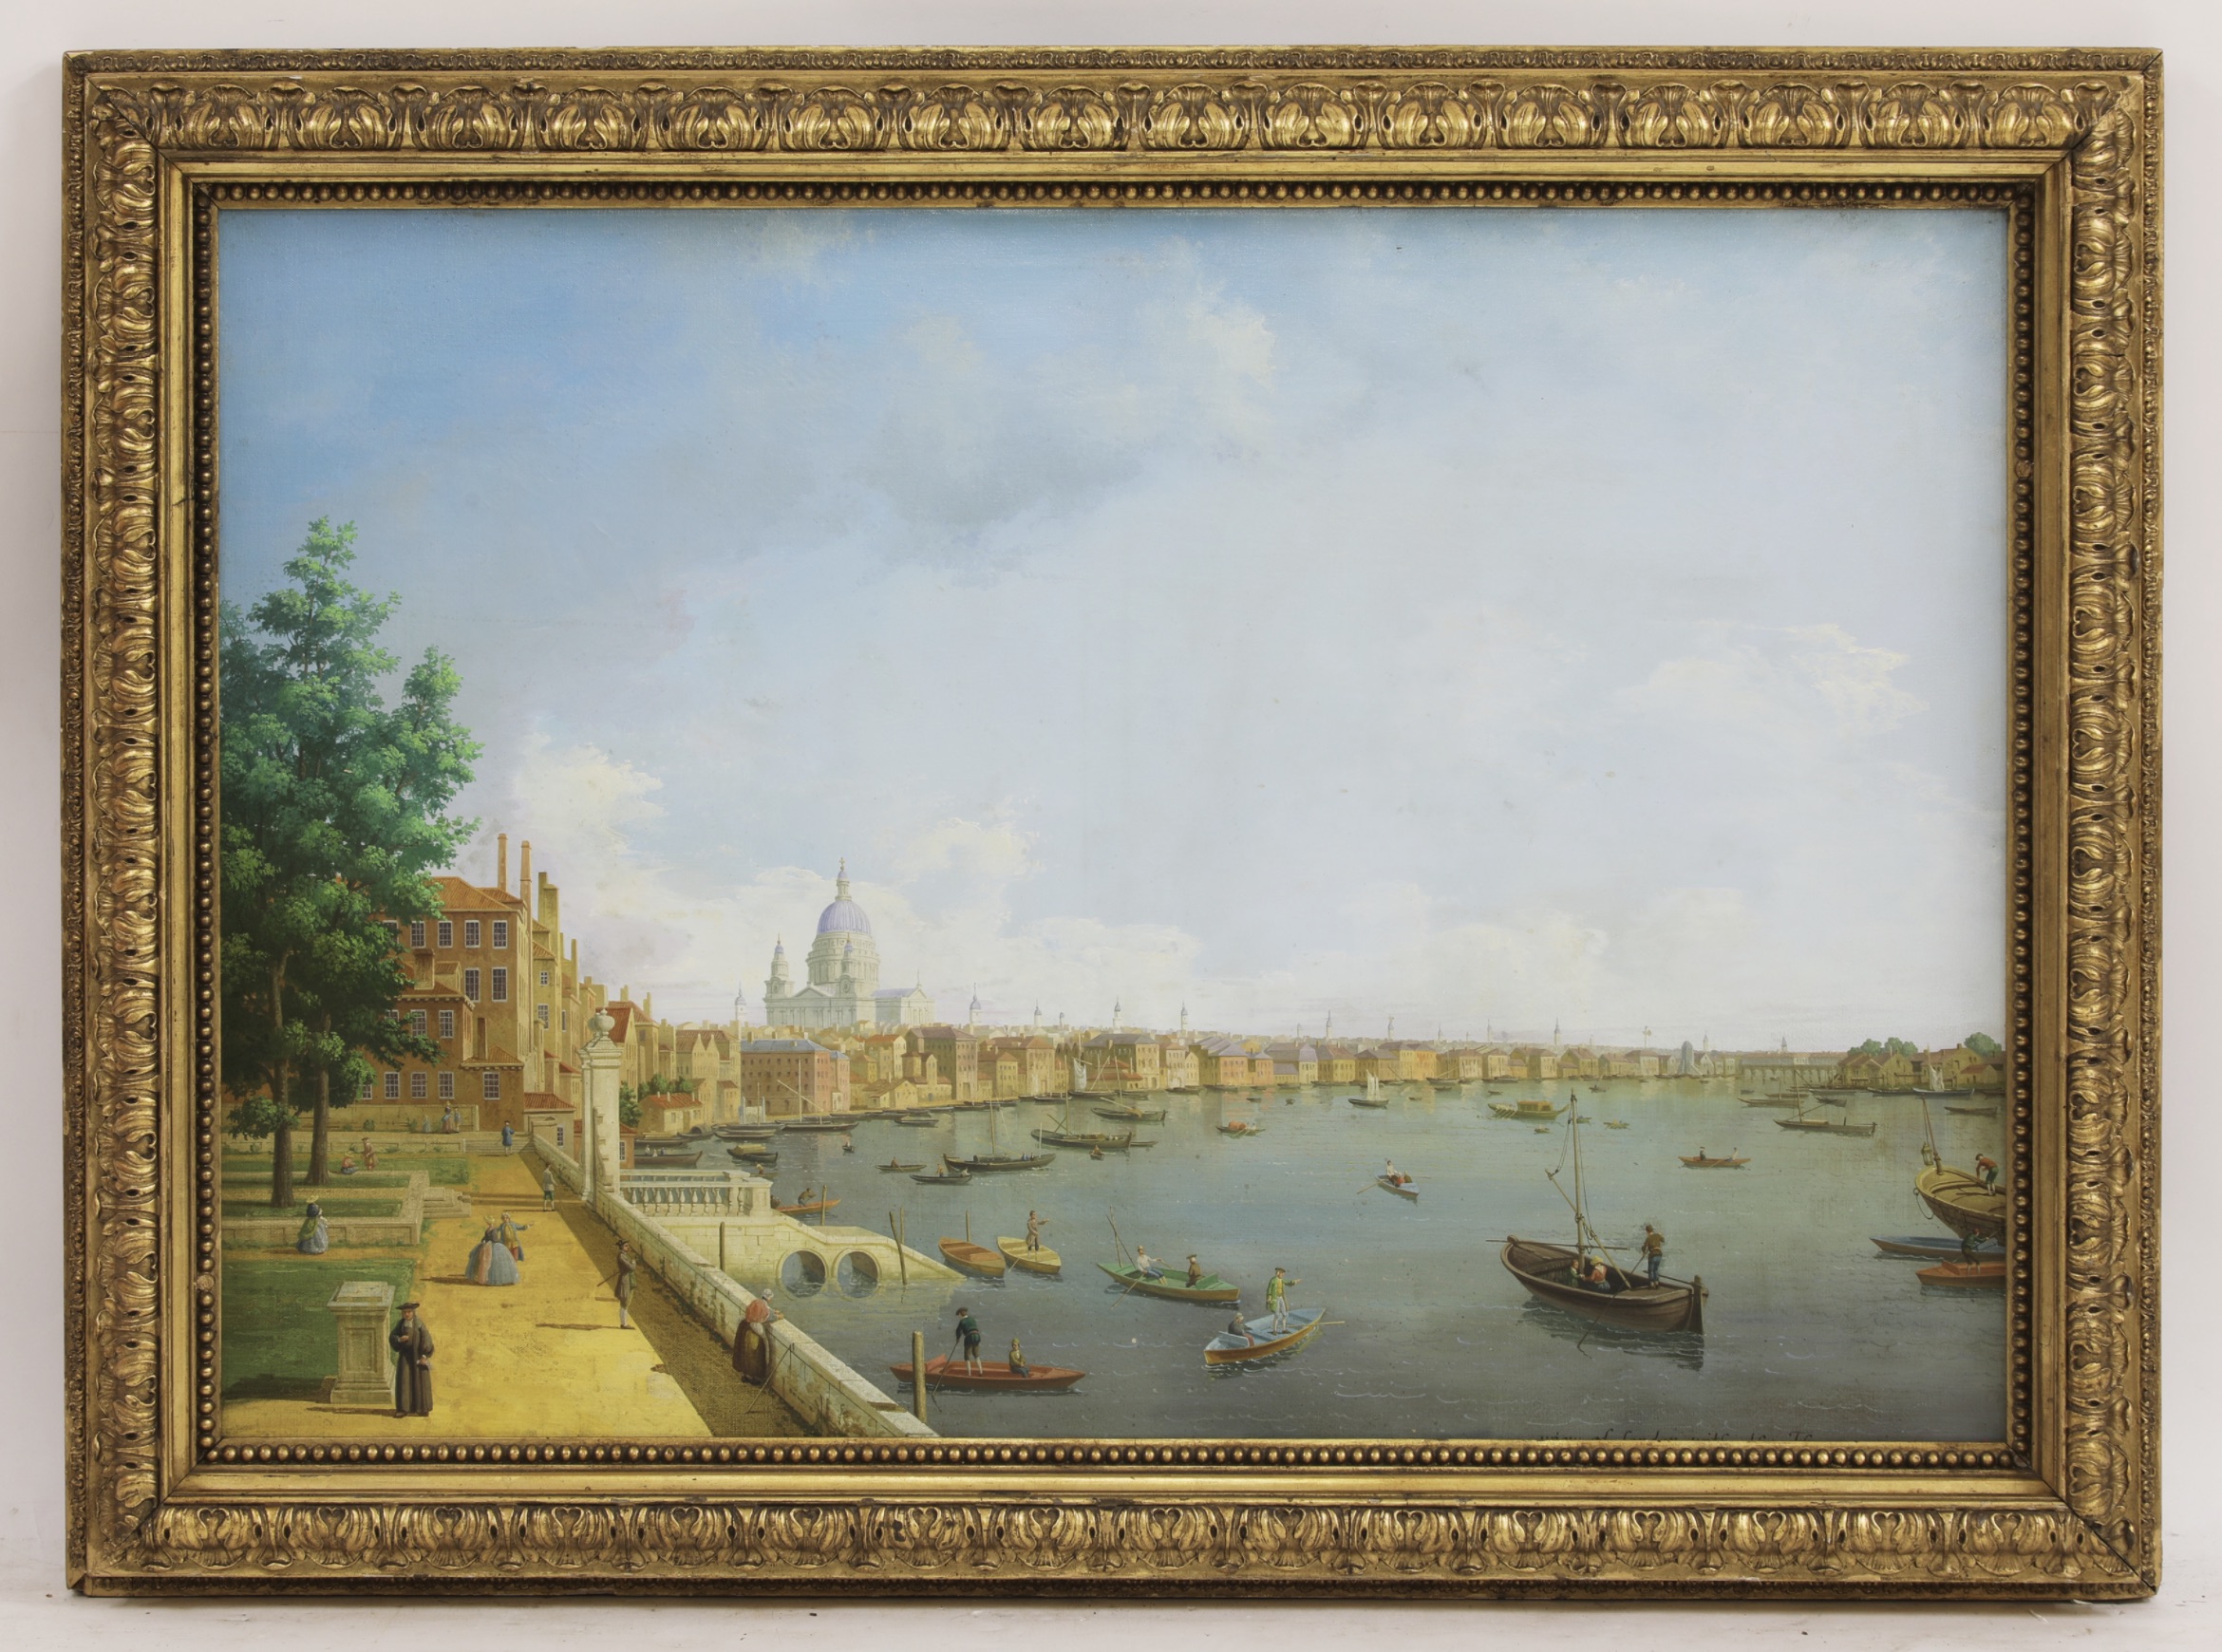 18th-century copy of Canaletto’s The Thames from Somerset House Terrace looking towards the City